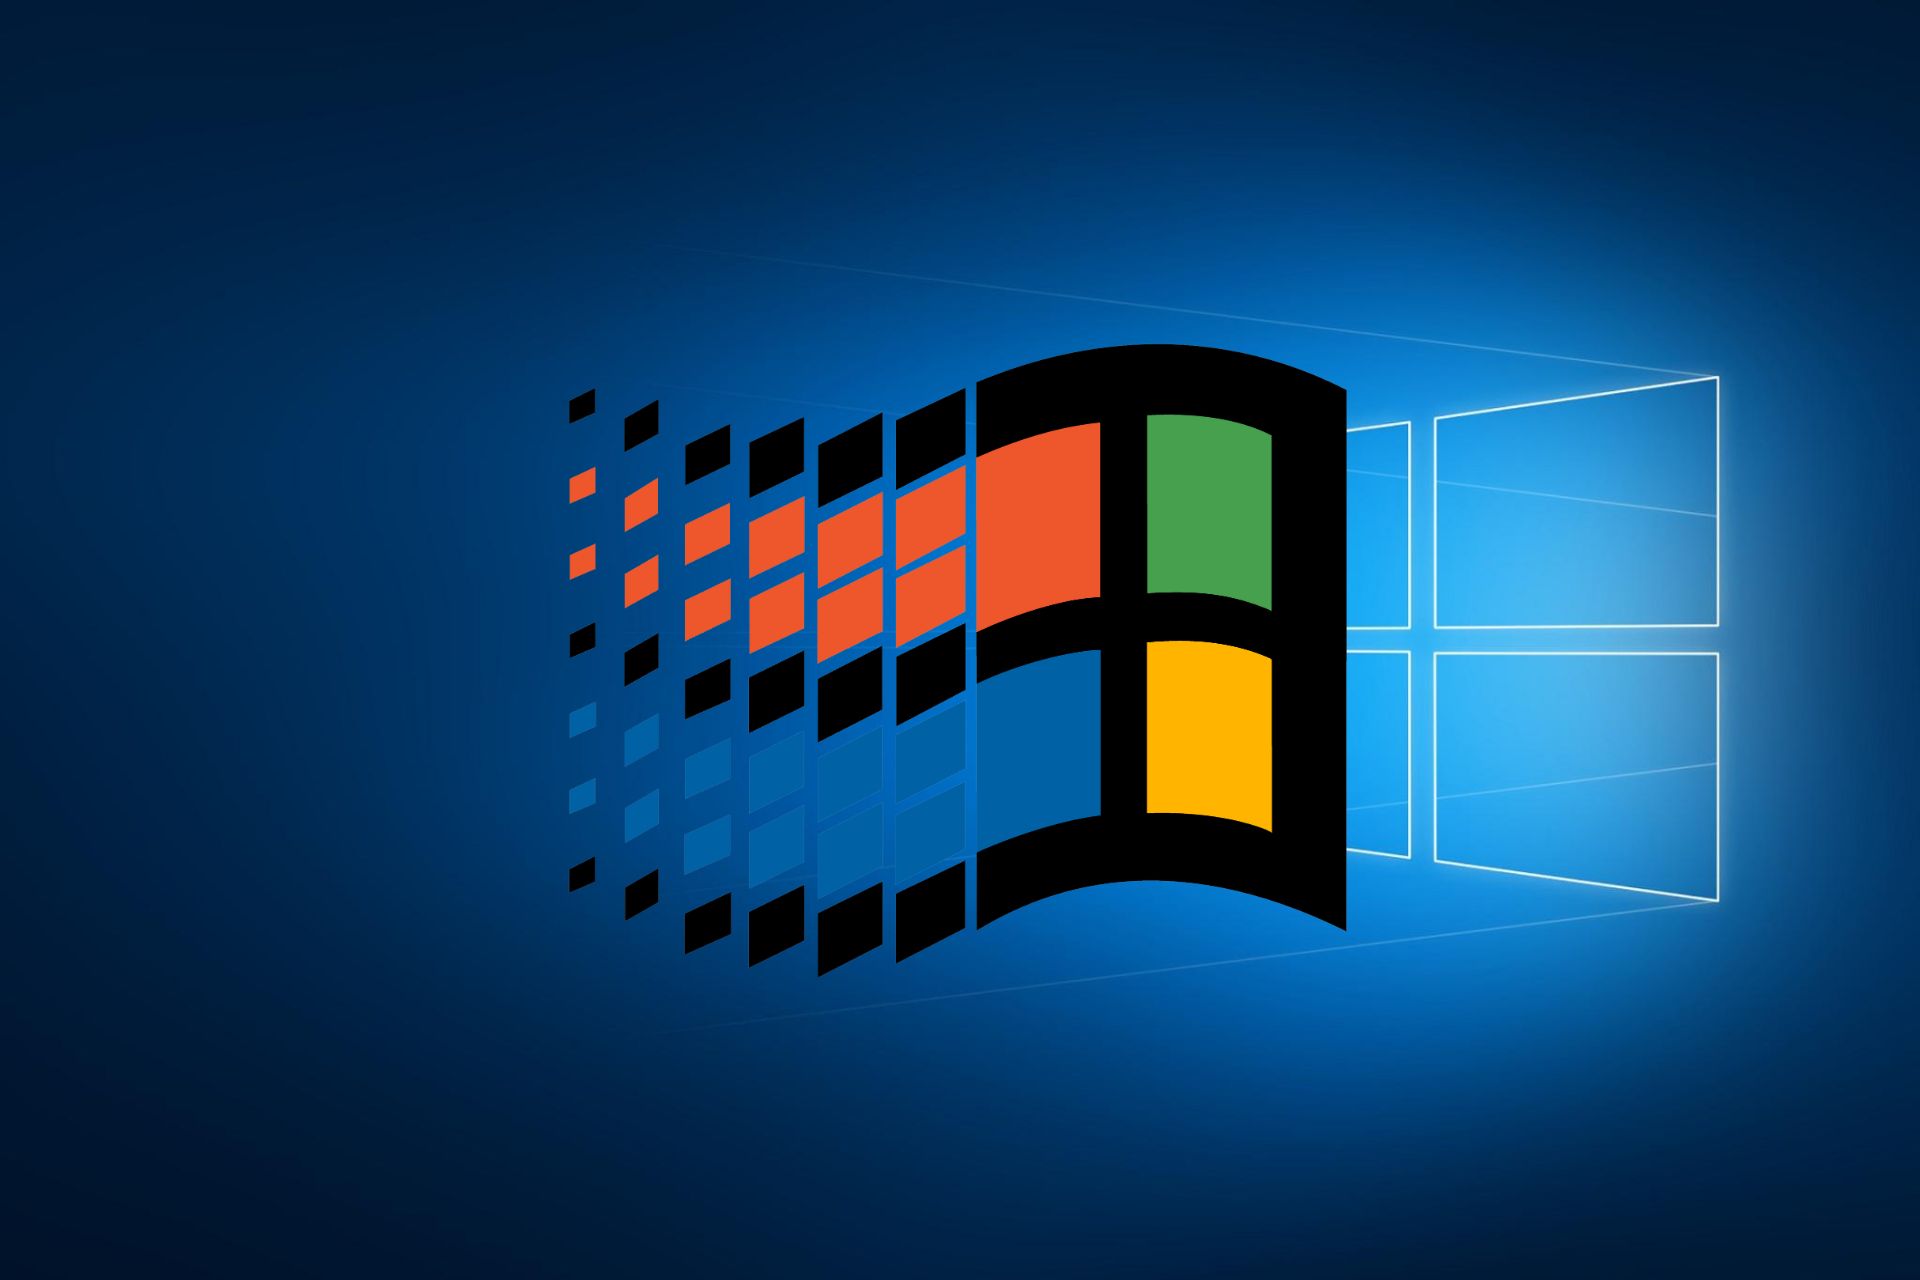 How To Install Windows 95 Theme On Windows 10 [Step By Step Guide]